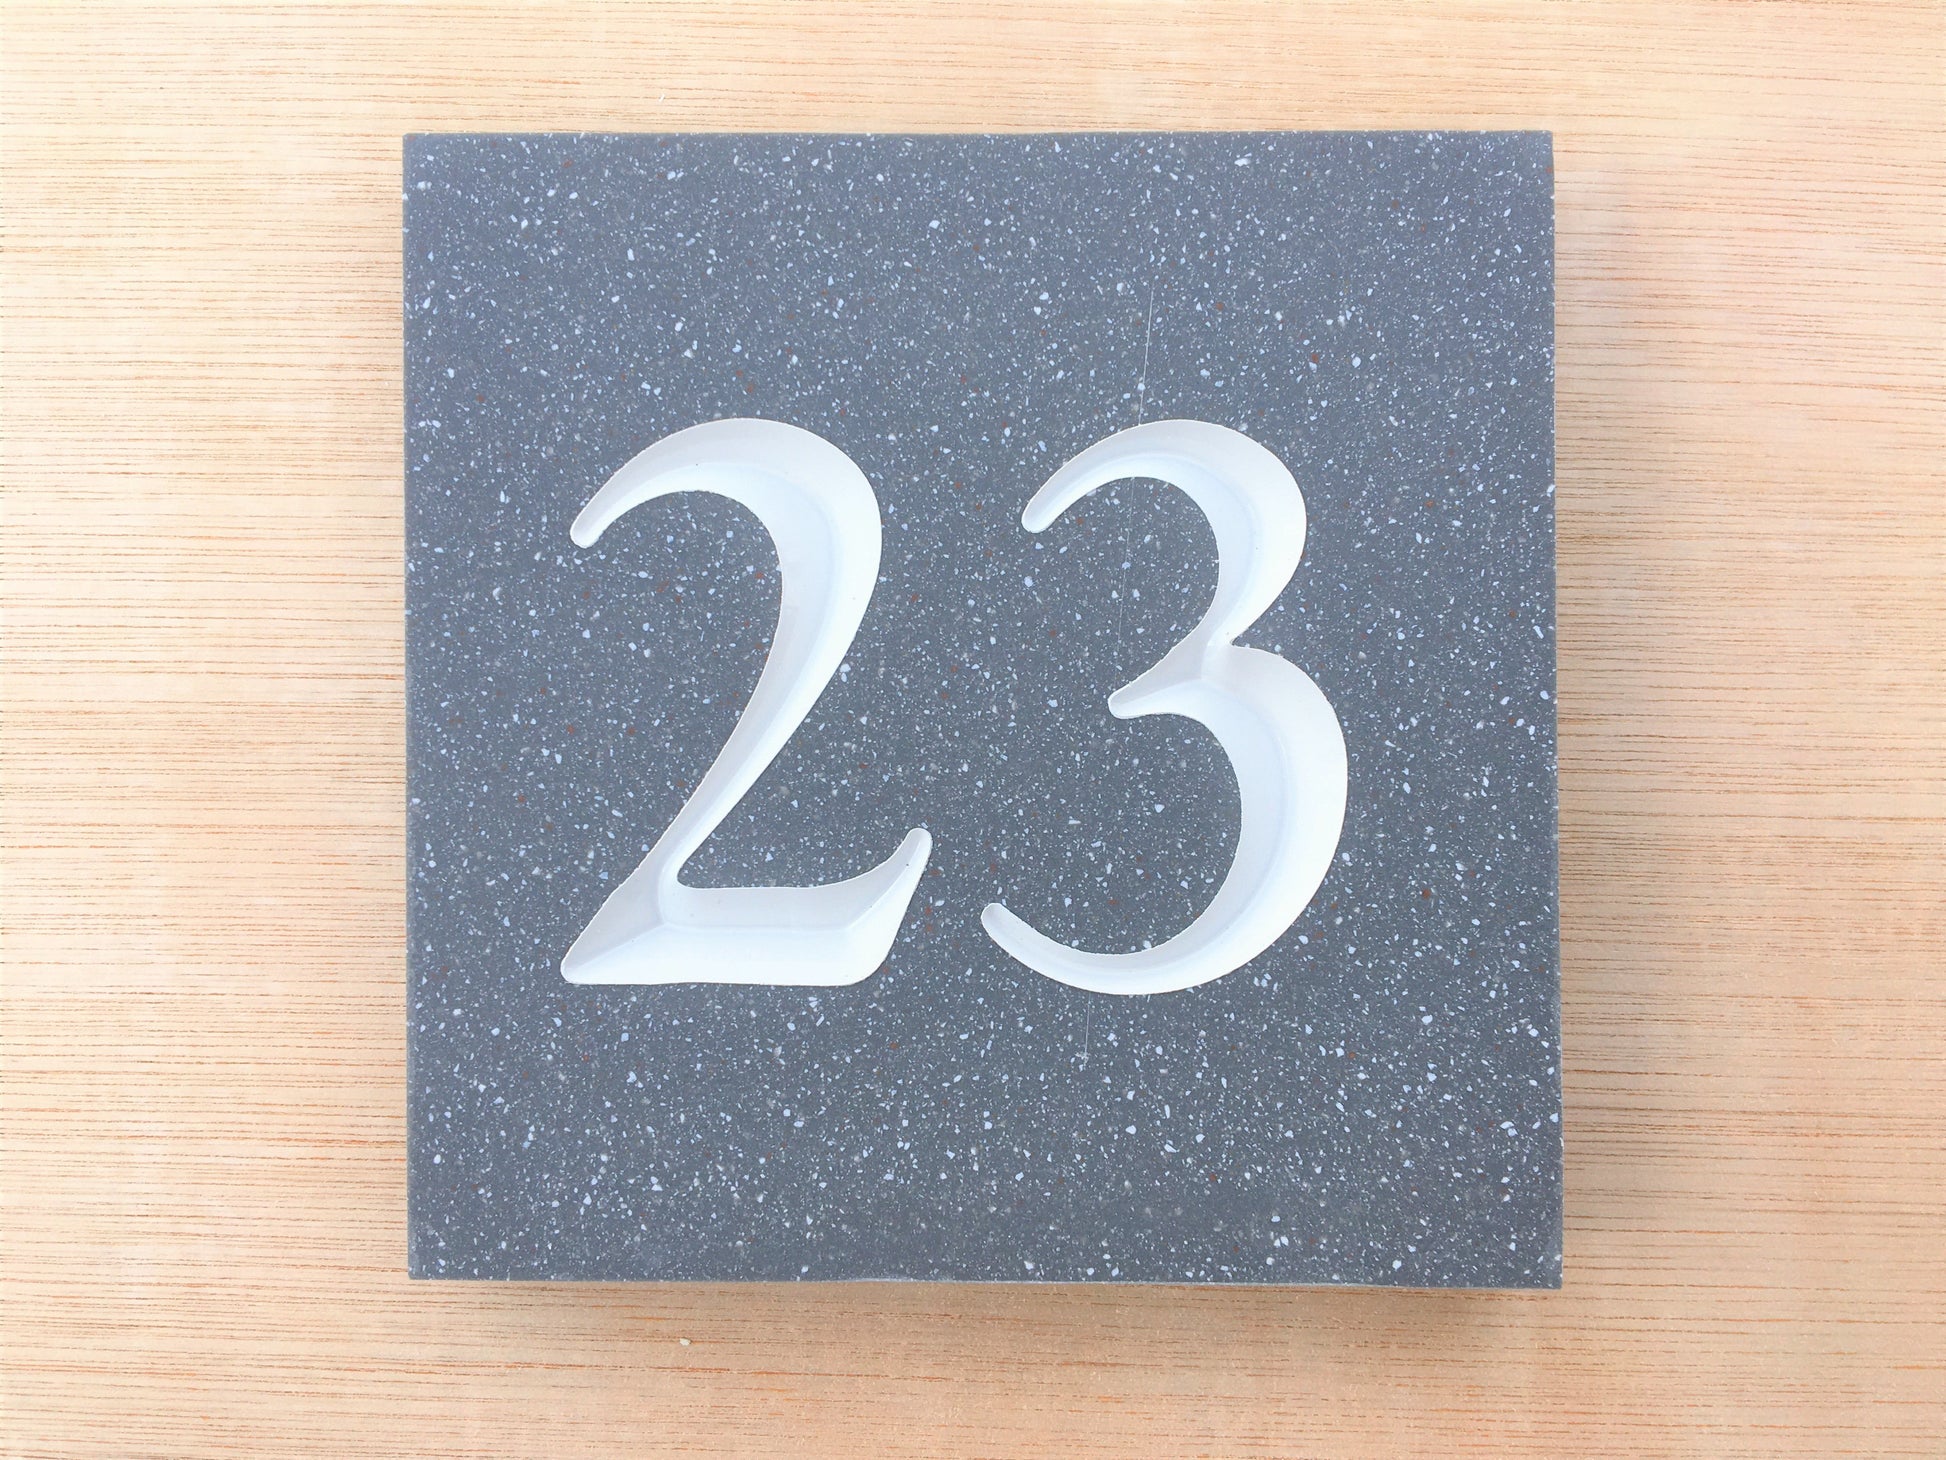 House sign measuring 100mm x 100mm using grey Corian with the house number 23 deep engraved and infilled with white monument paint